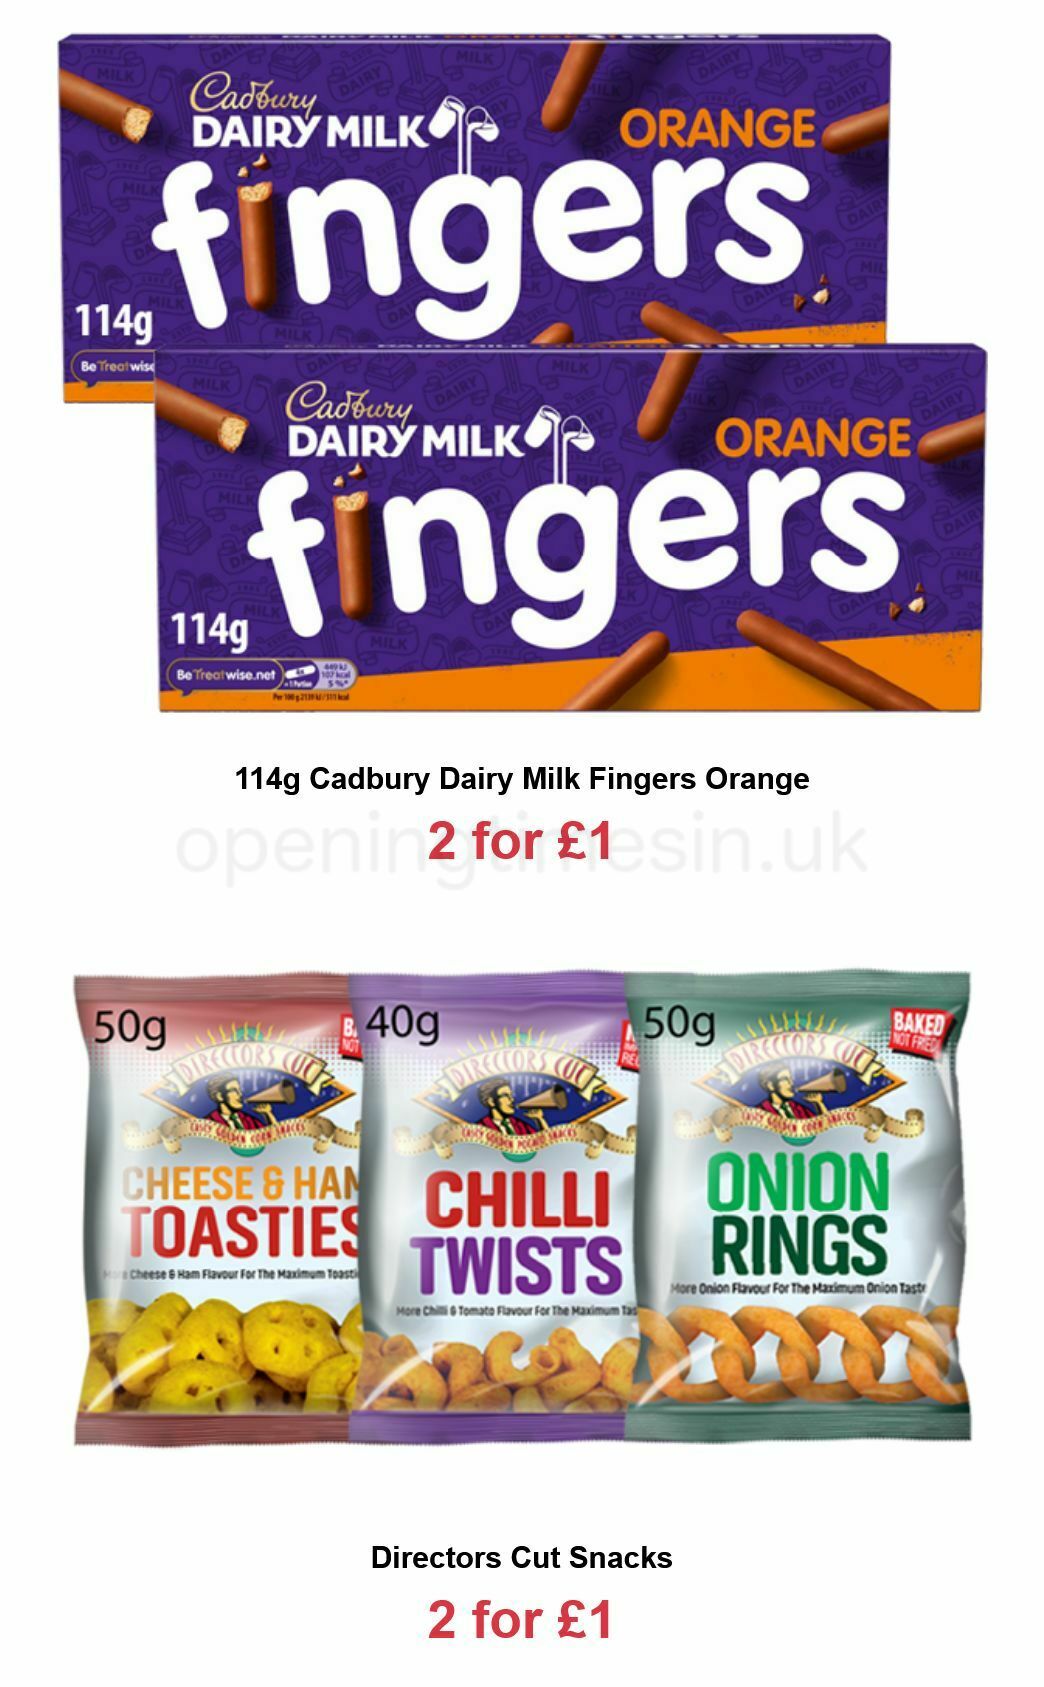 Farmfoods Offers from 21 December